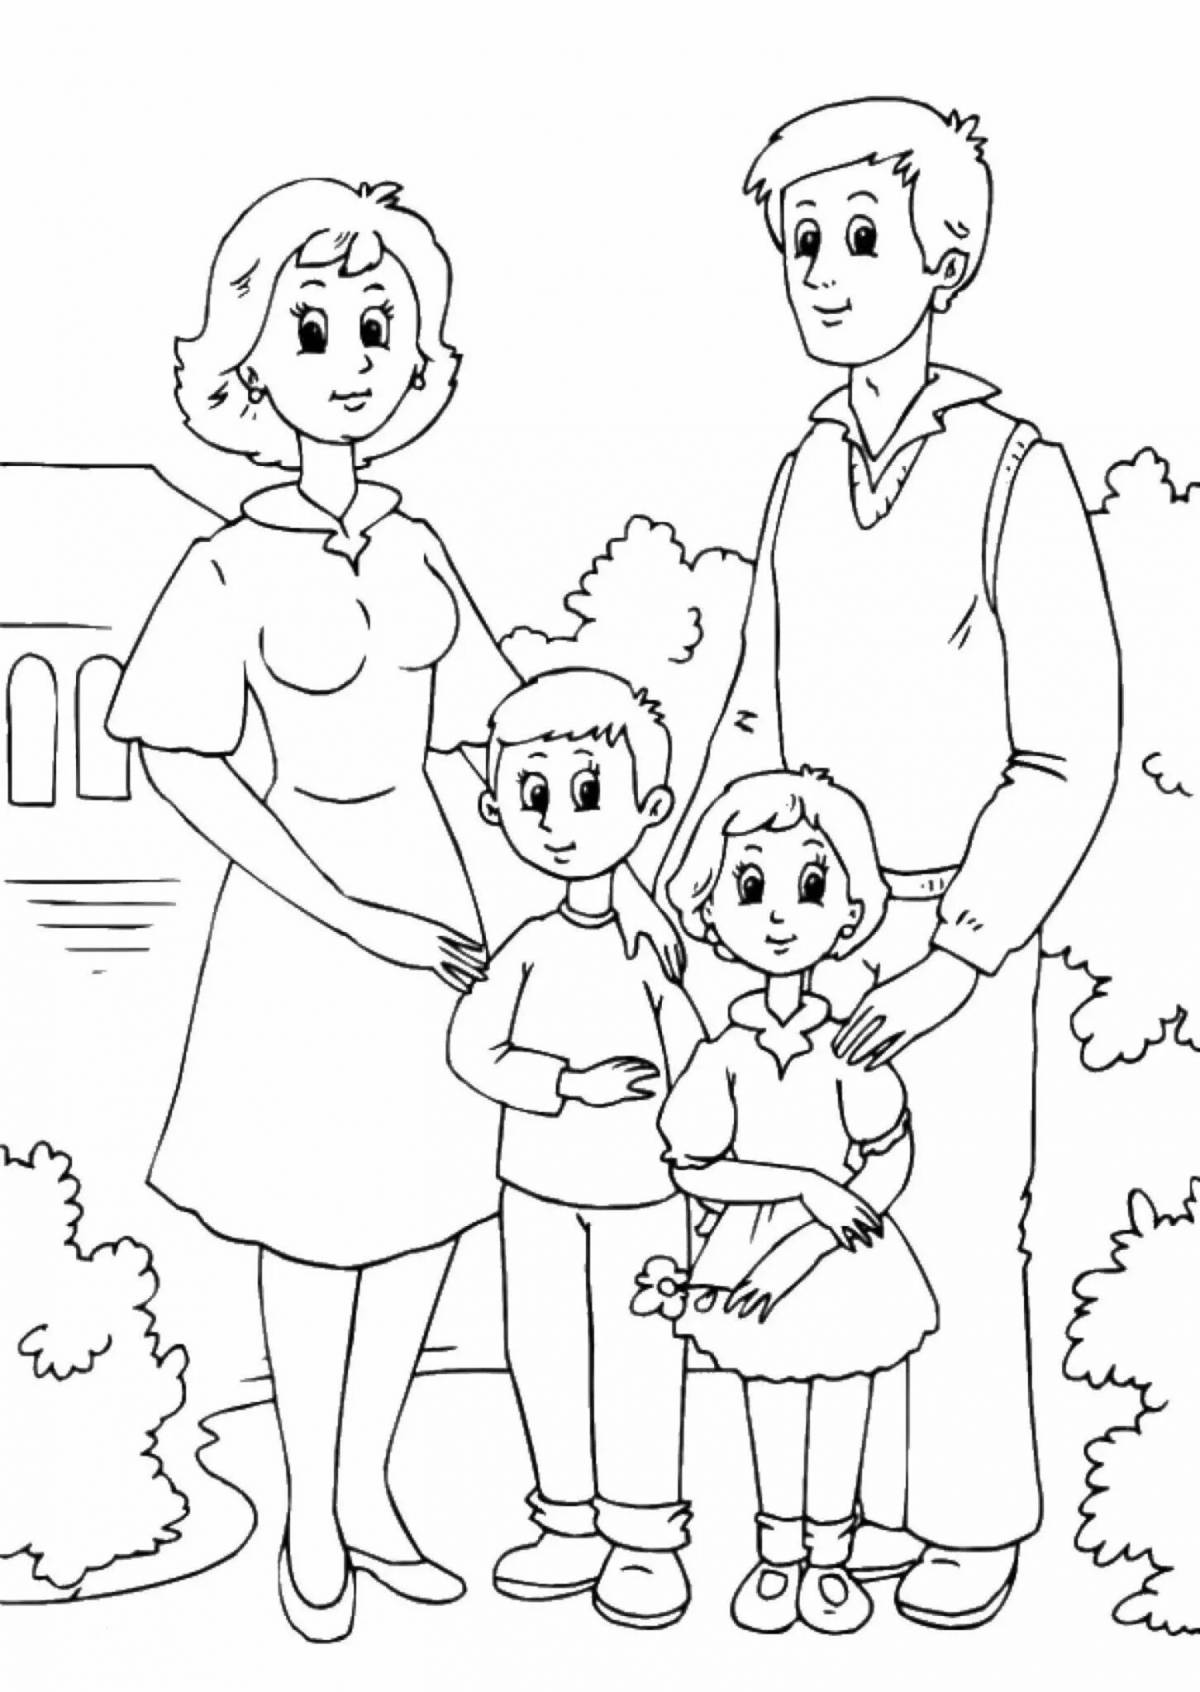 My family's awesome coloring page